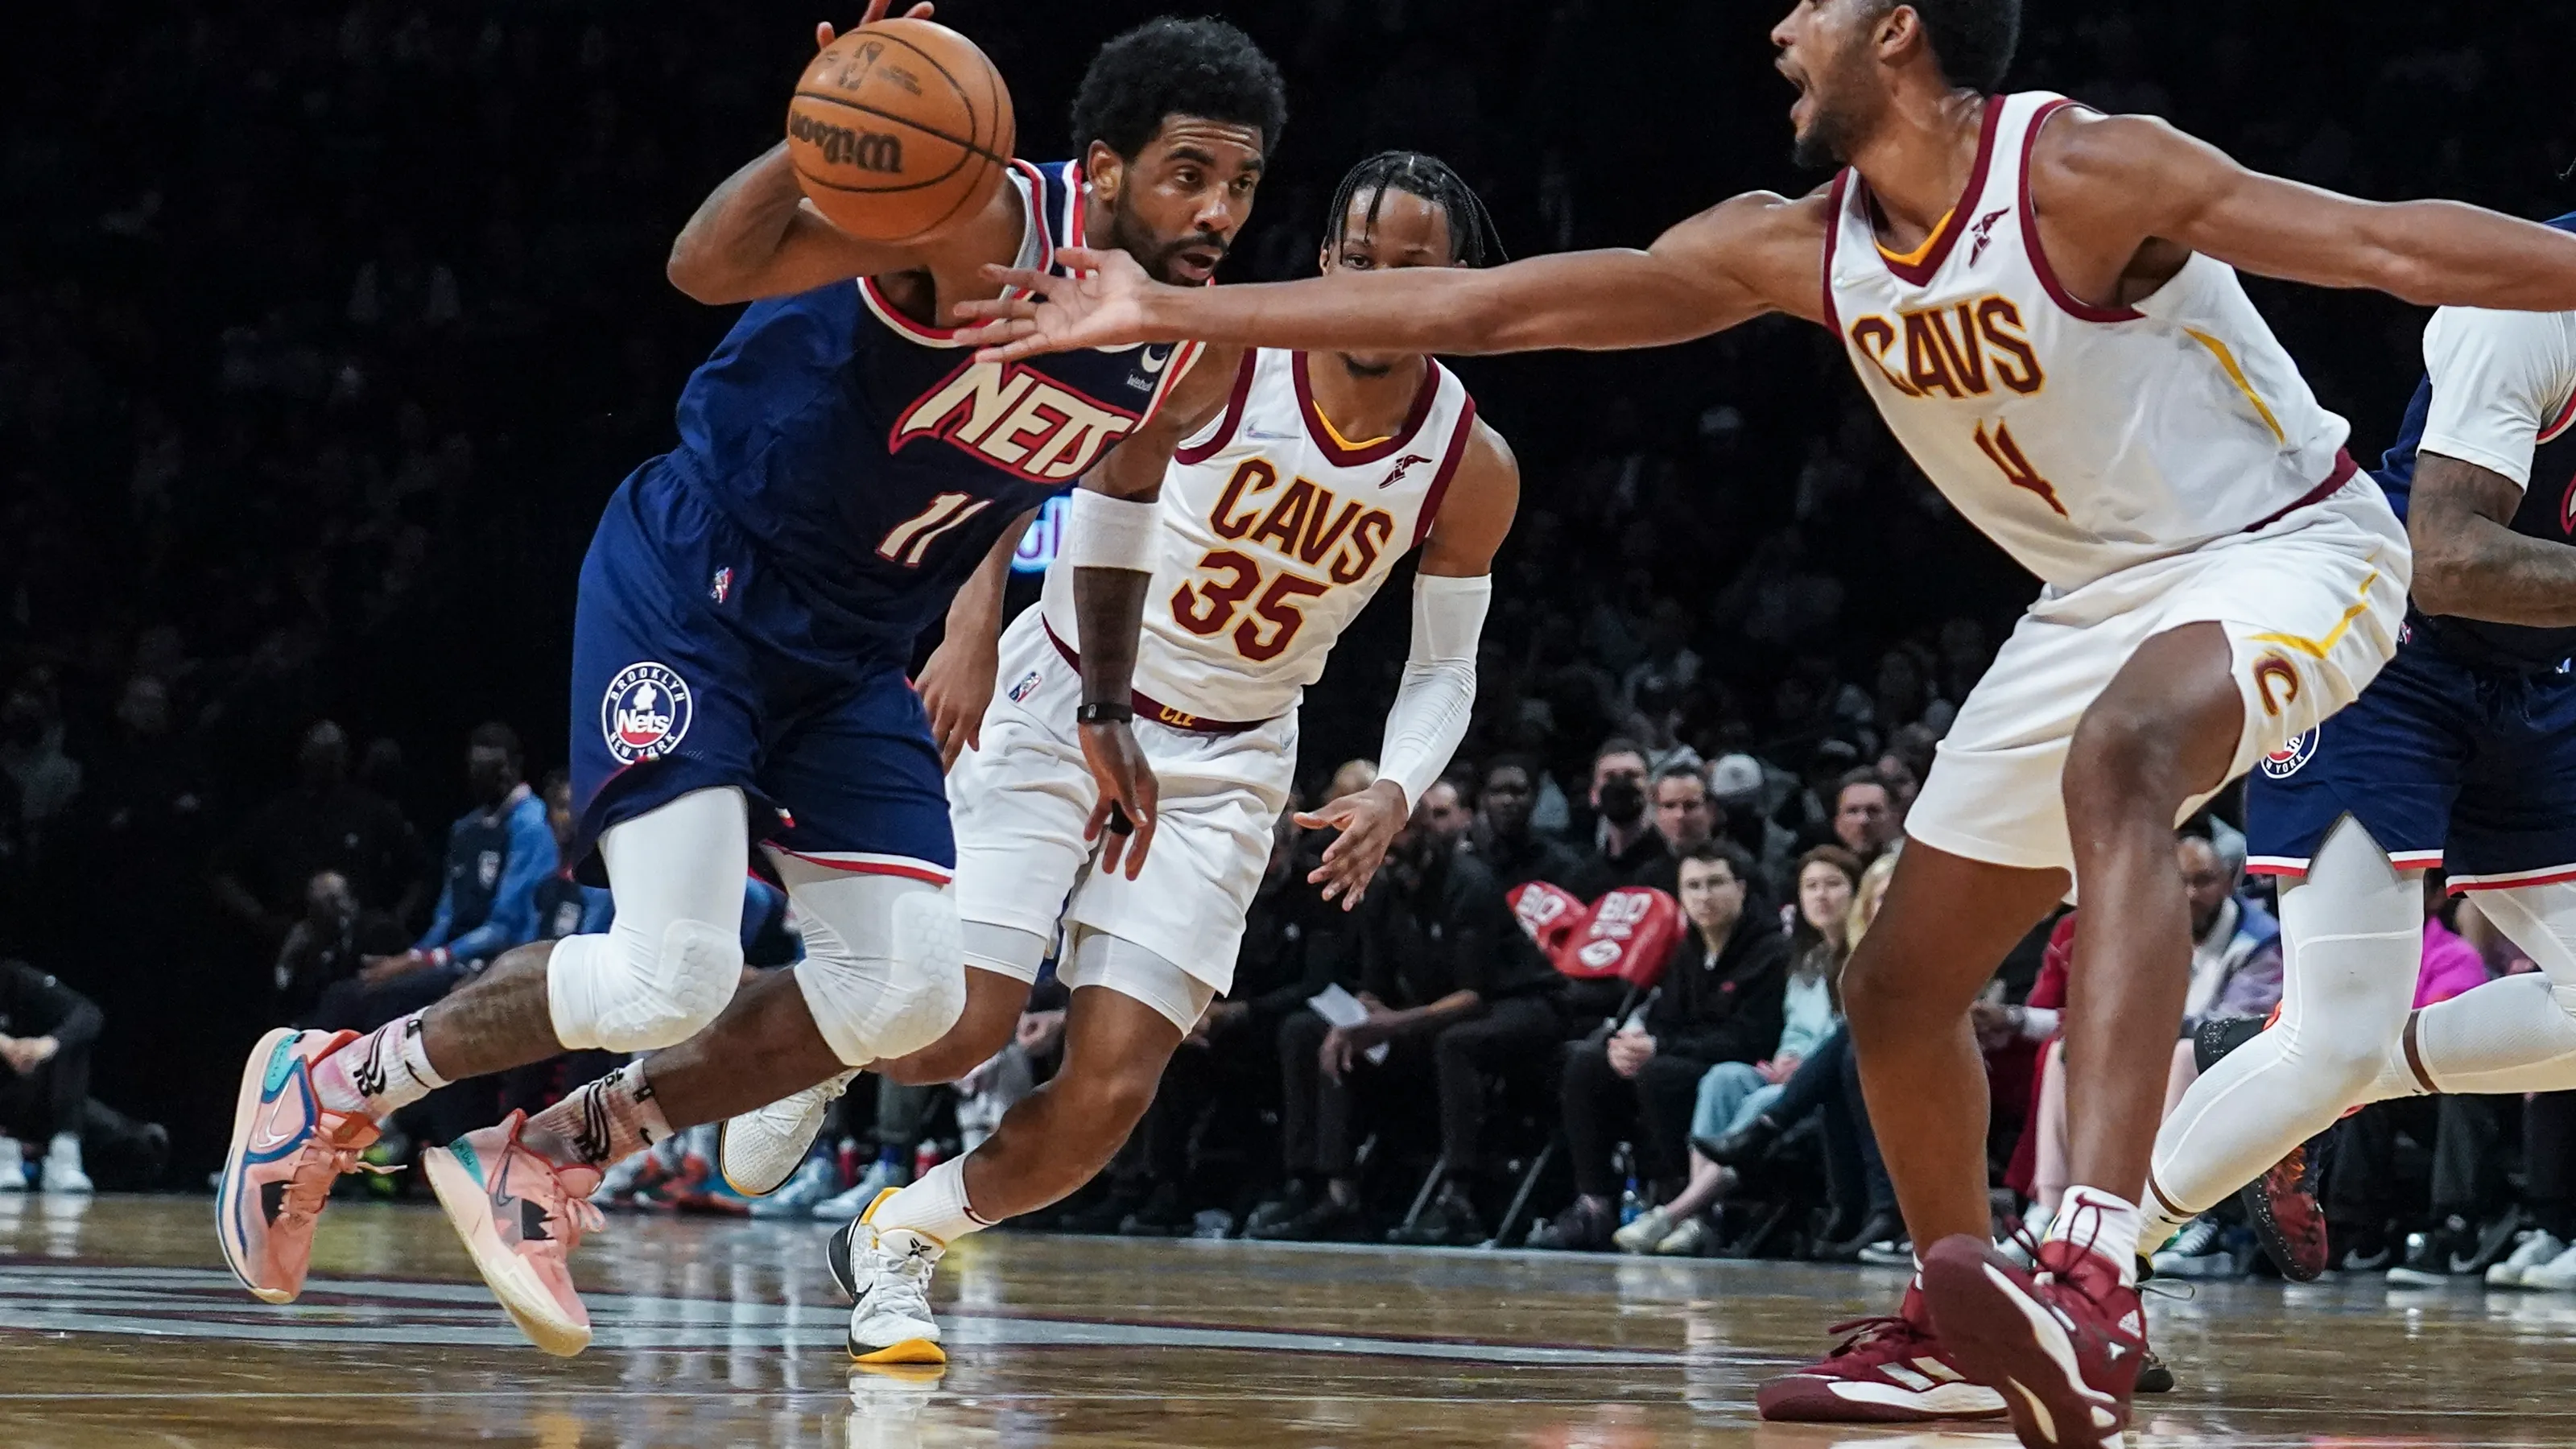 Live Thread: Play-In Game, Cavs @ Nets